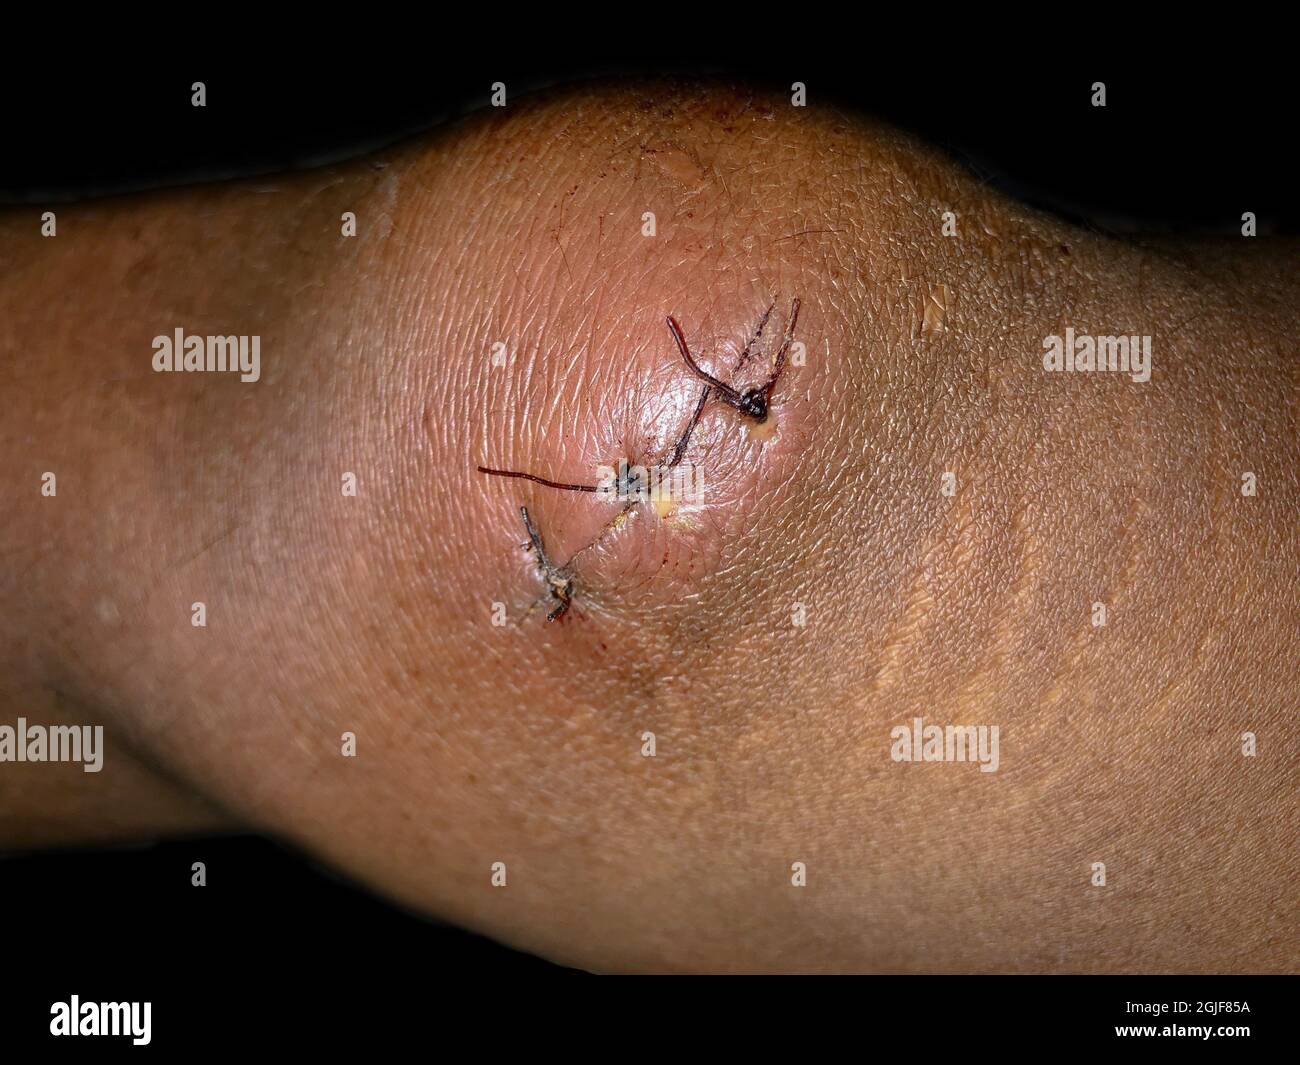 Stitched lacerated wound at knee area of Southeast Asian man. Isolated on black. Stock Photo